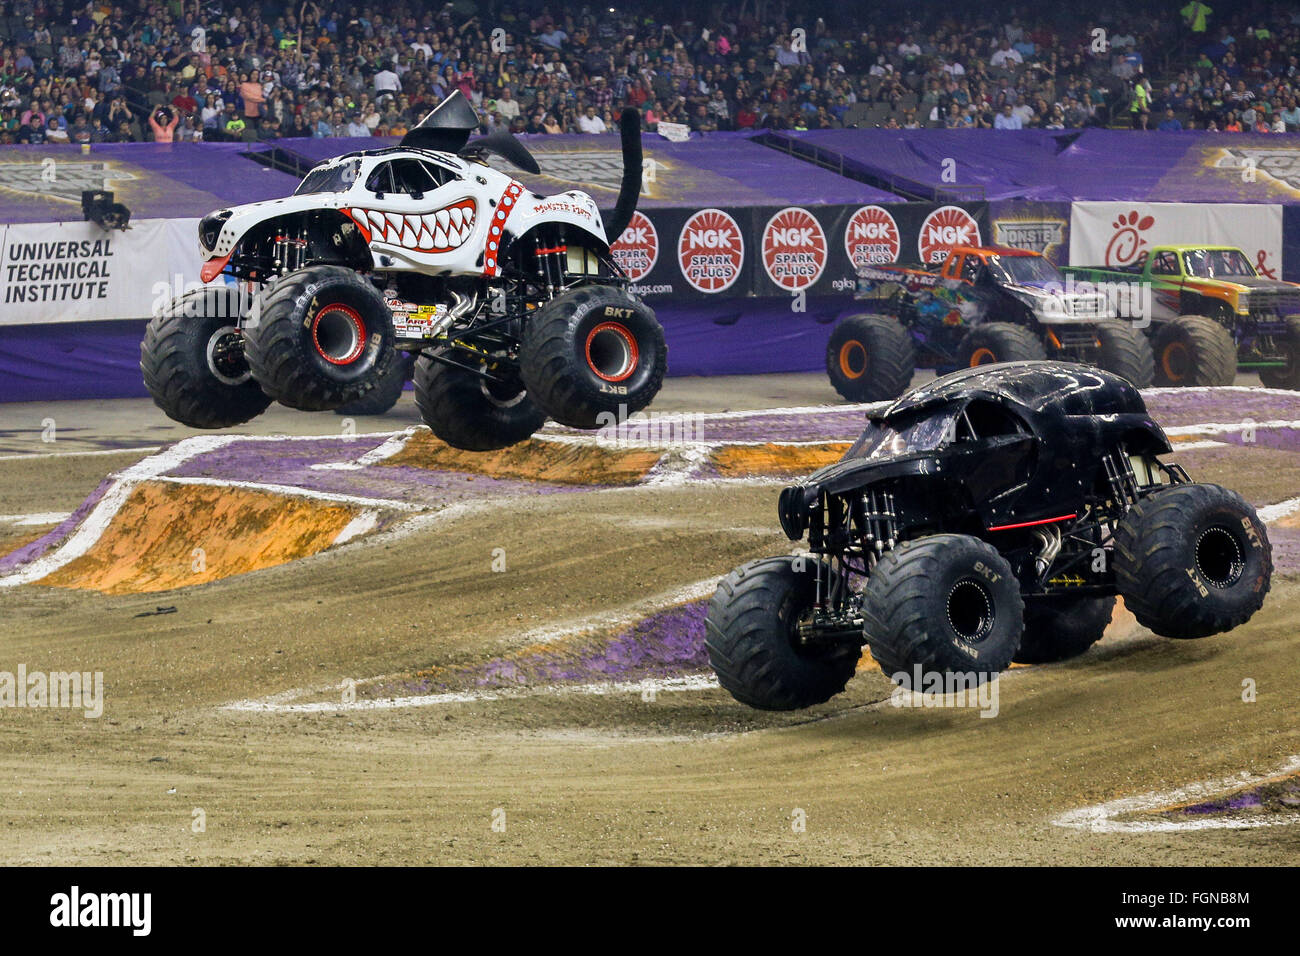 New Orleans, LA, USA. 20th Feb, 2016. Monster Mutt and Dooms Day monster truck in action during Monster Jam at the Mercedes-Benz Superdome in New Orleans, LA. Stephen Lew/CSM/Alamy Live News Stock Photo